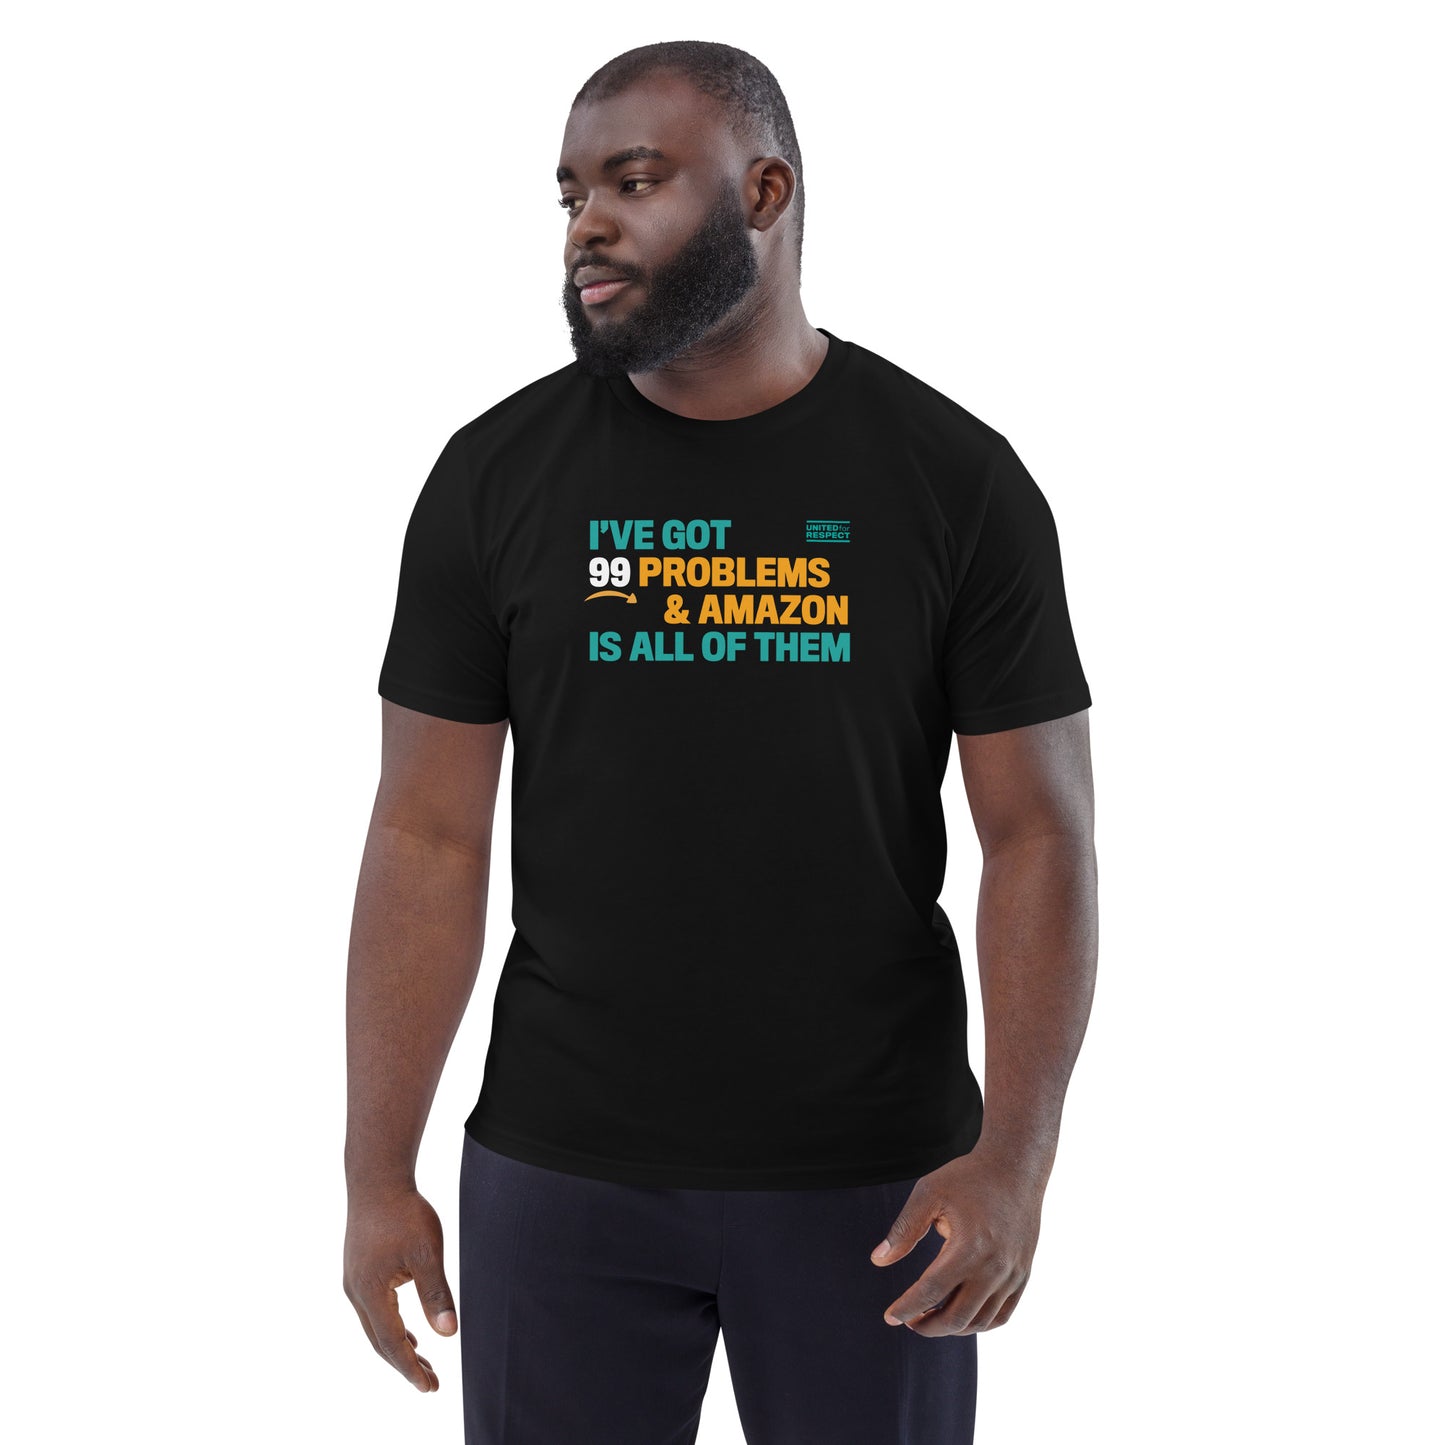 "I've got 99 problems and Amazon is all of them" unisex T-shirt